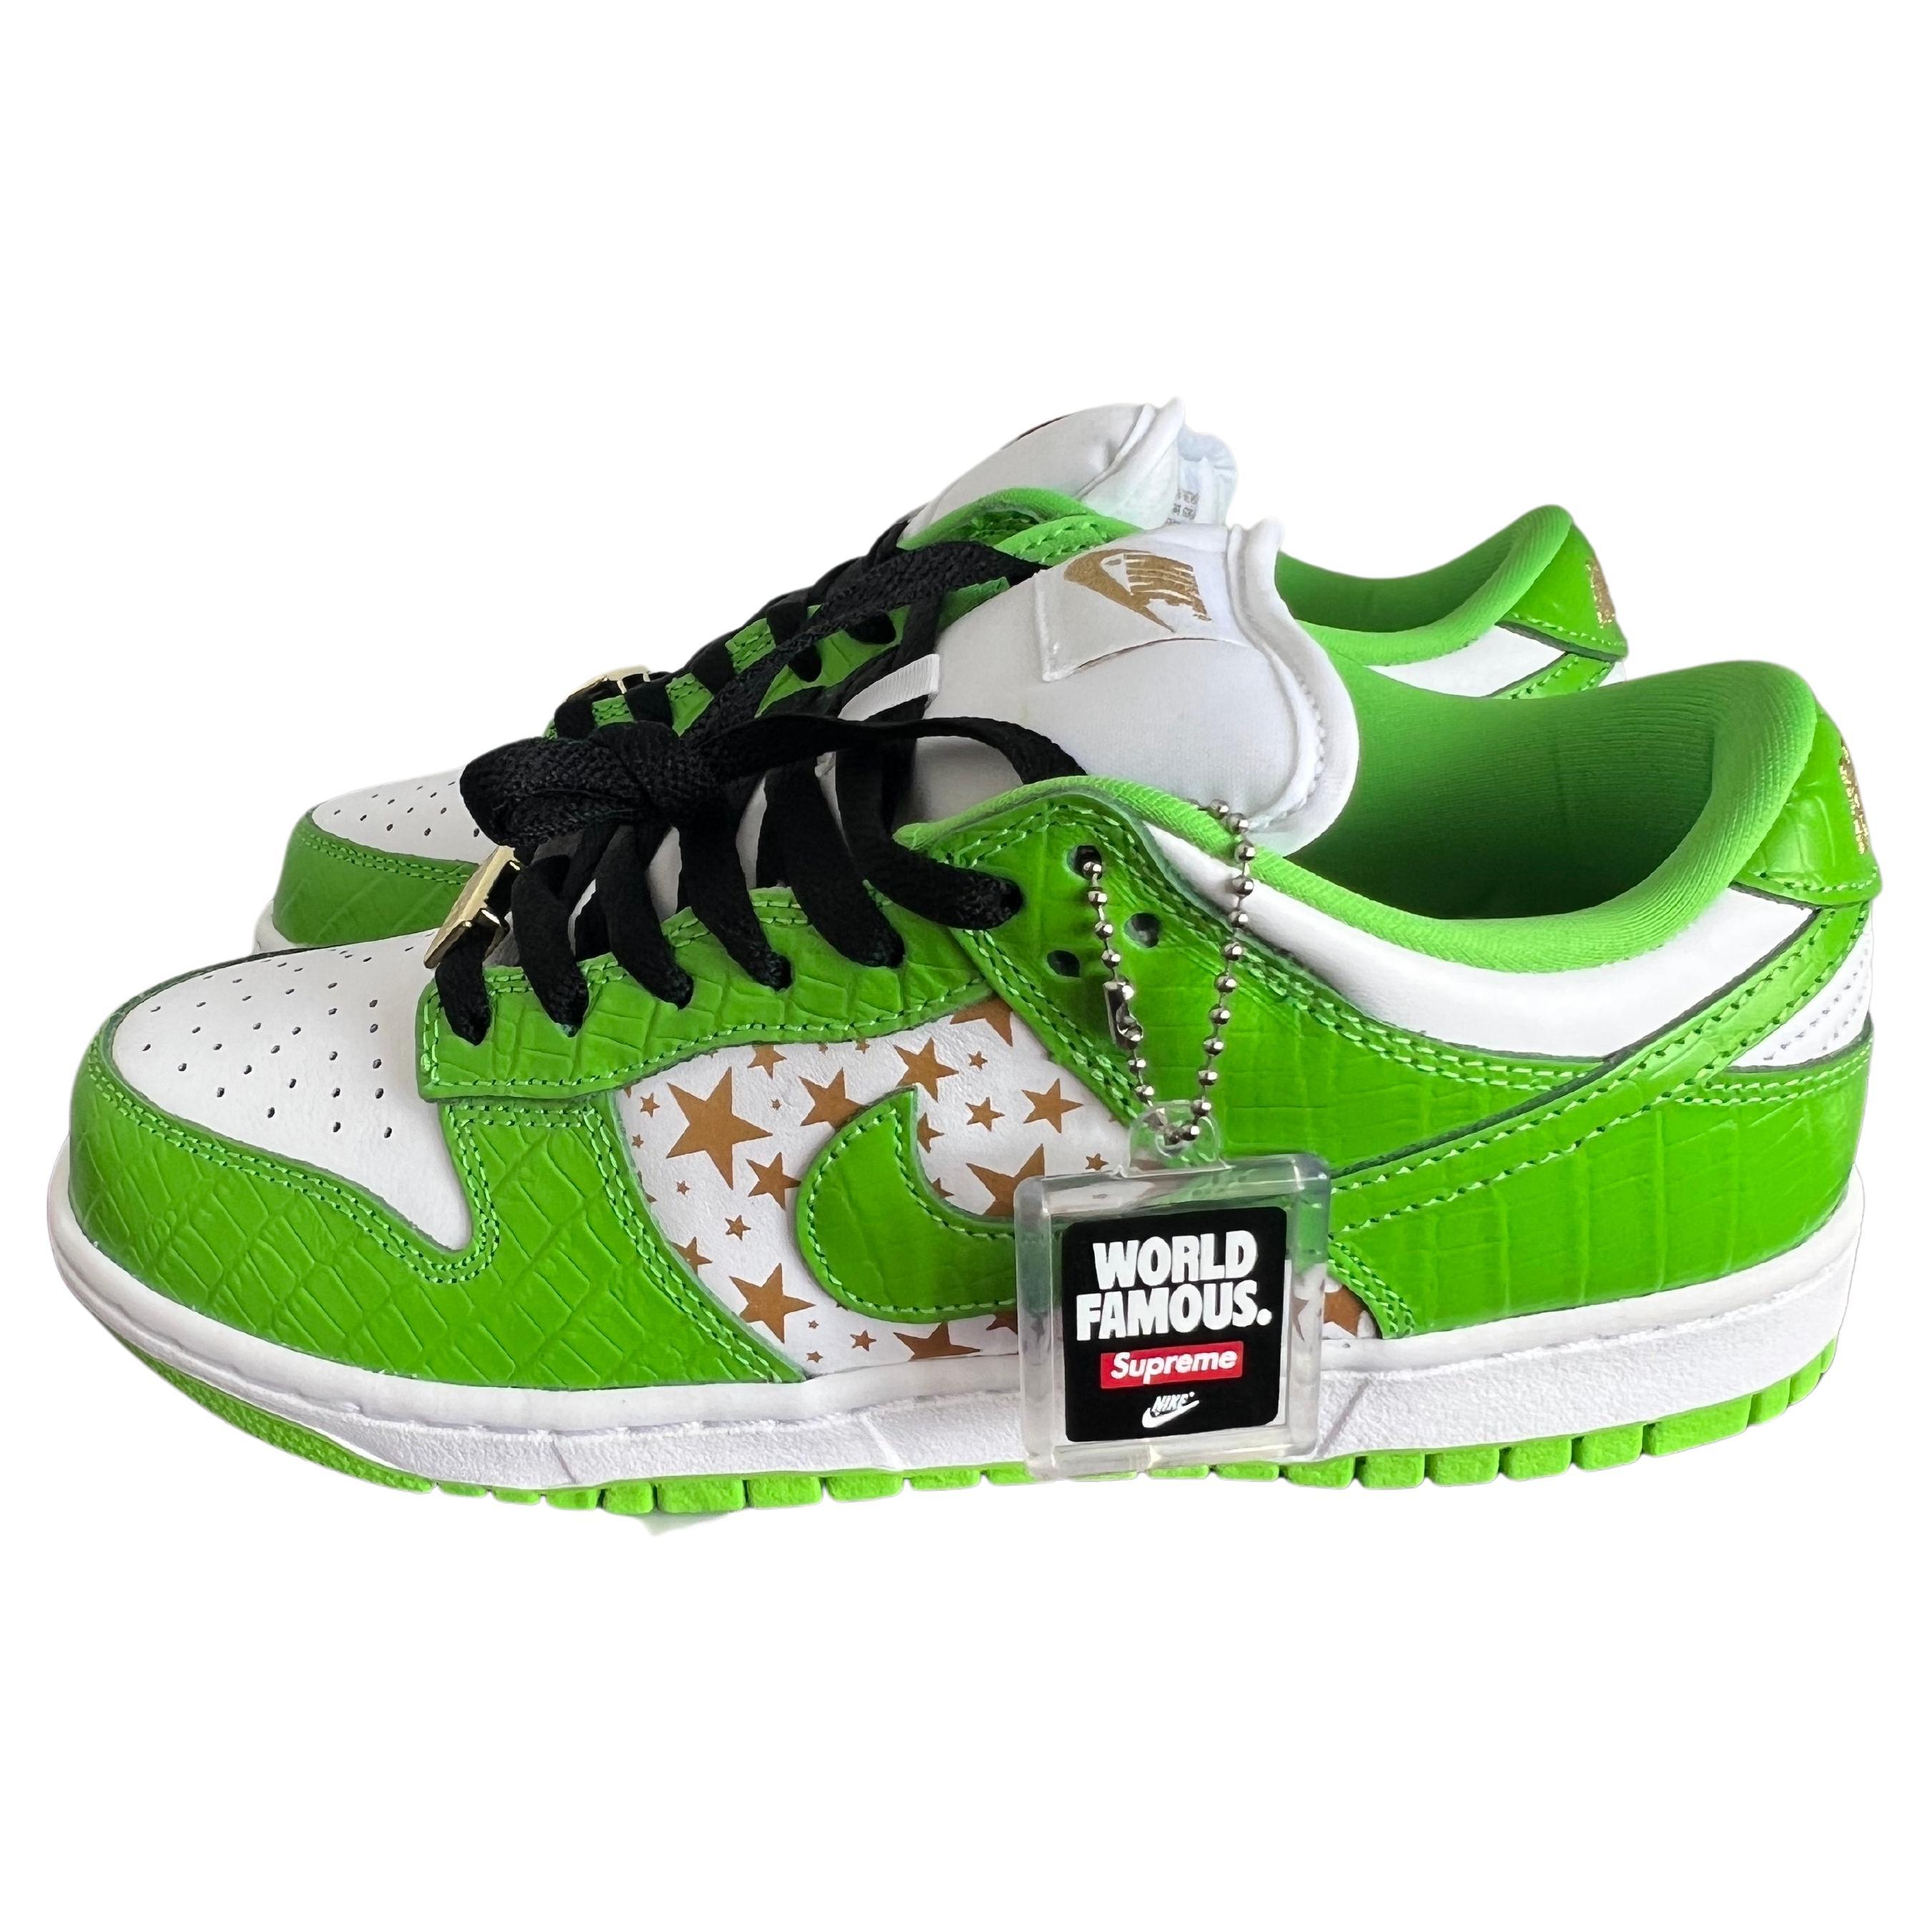 Supreme x Nike SB Green Star/Hype size US9.5 For Sale